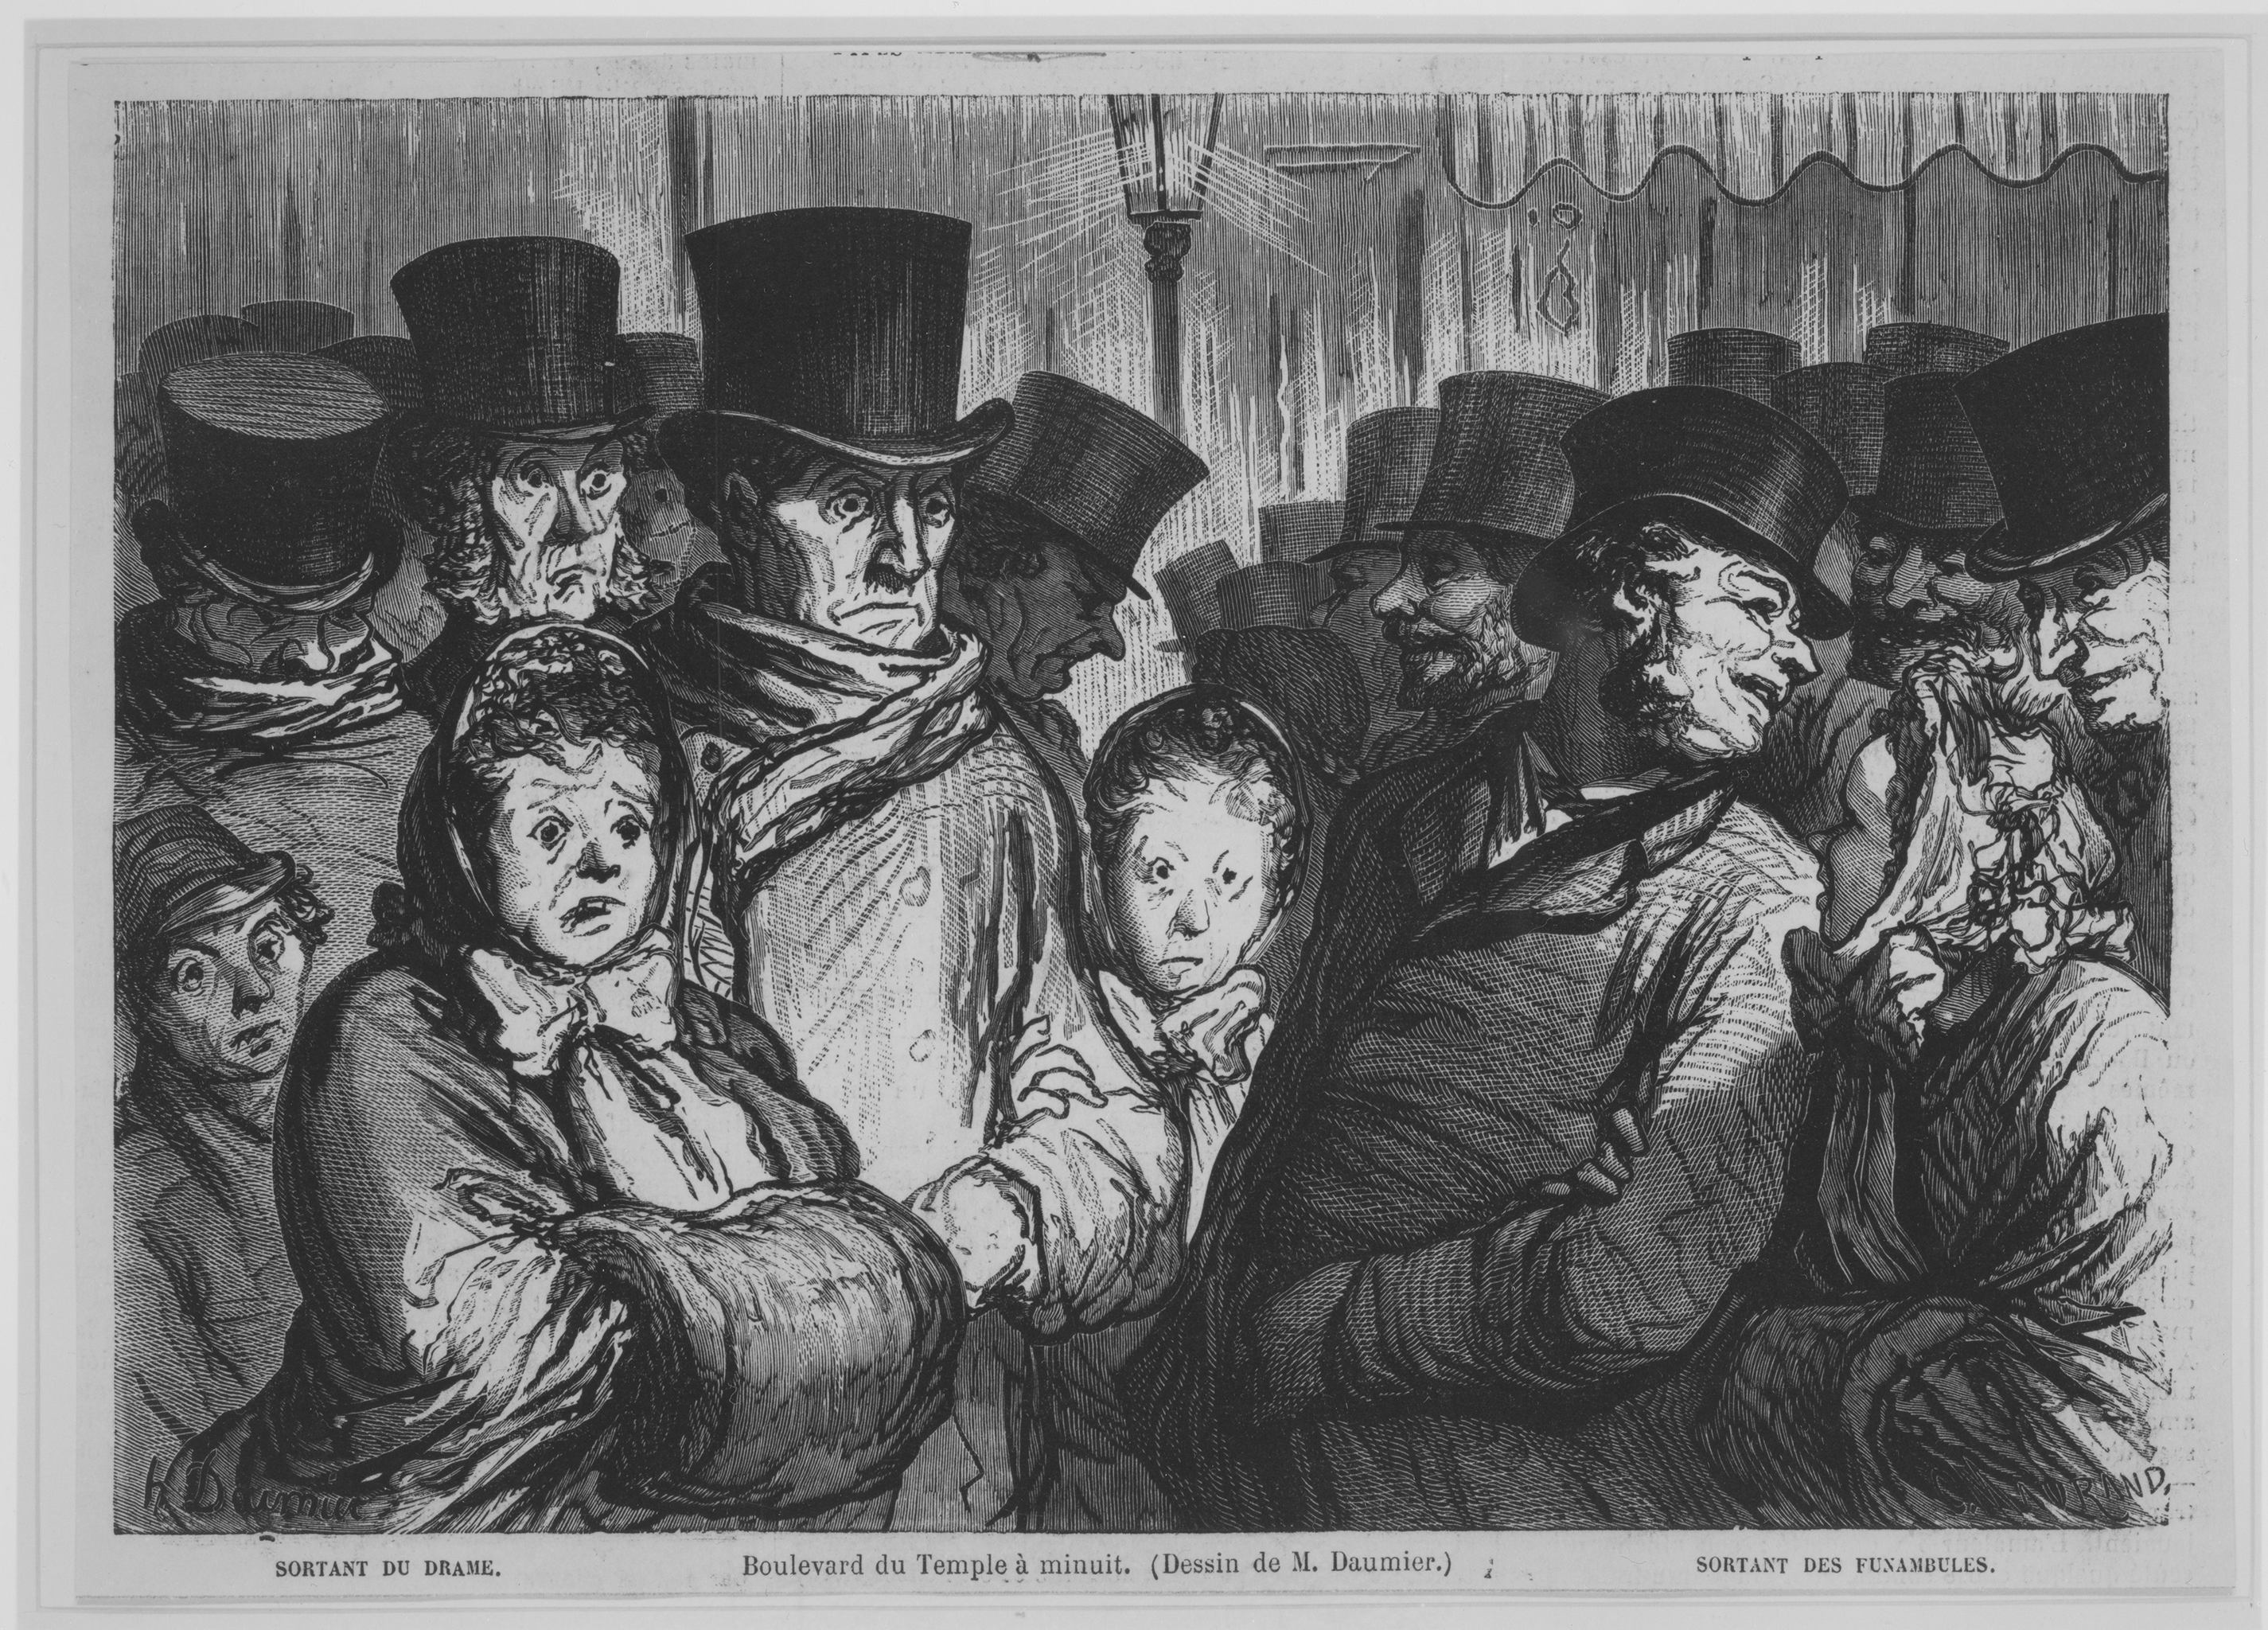 A black and white print of a large group of people standing under a lit lantern. Among the group, many are men wearing coats and black top hats. In the foreground, there are women three women also wearing coats.